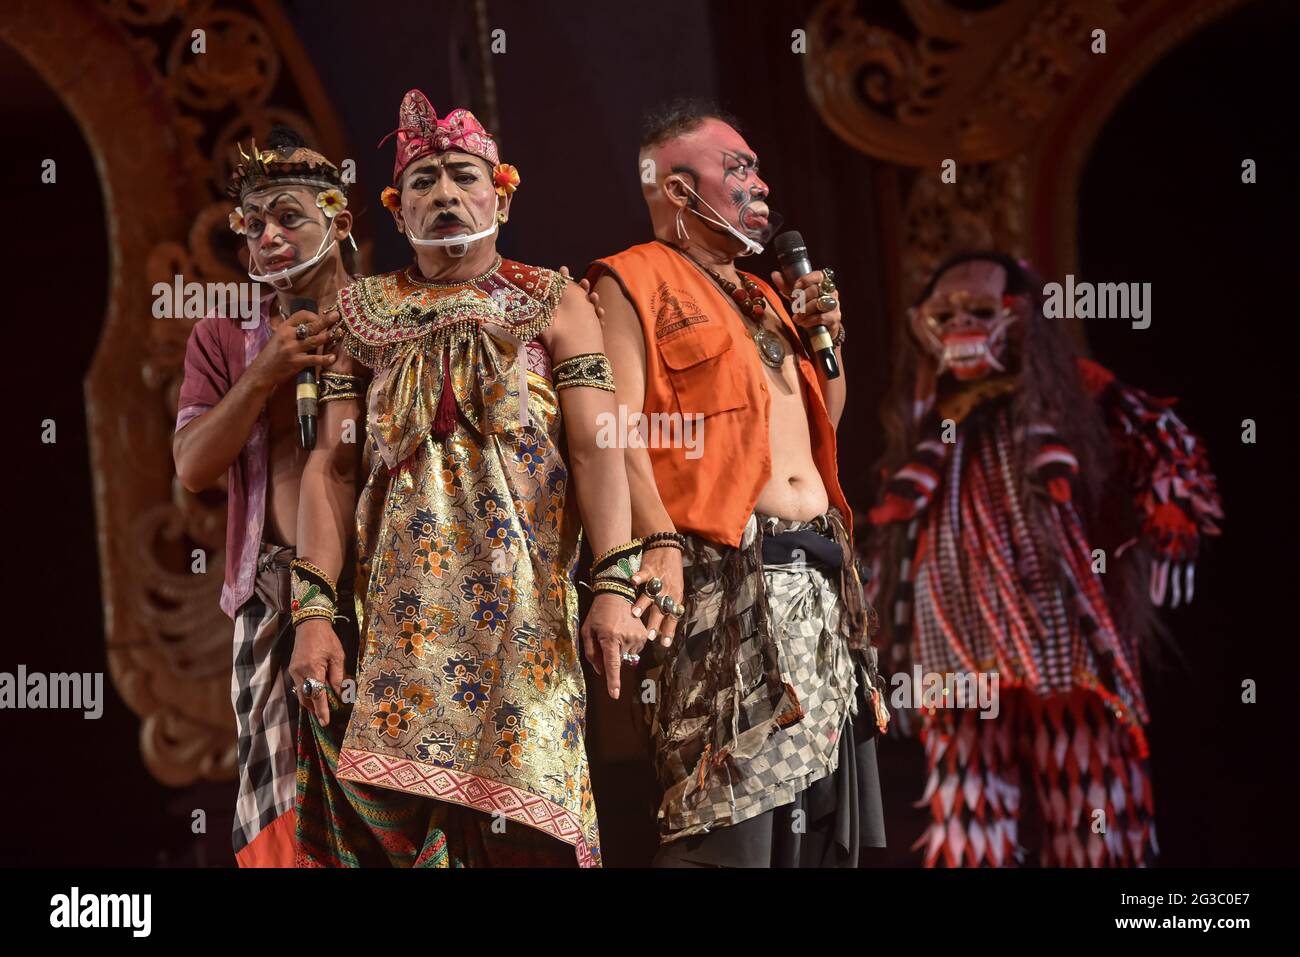 Denpasar, Bali, Indonesia. 15th June, 2021. A classic Drama Gong, Bali  theatrical drama performance entitled ''Pusaka Murbeng Bumi'' (Heirloom  from the Earth) performed by Sekar Hati art group from Gianyar at Denpasar